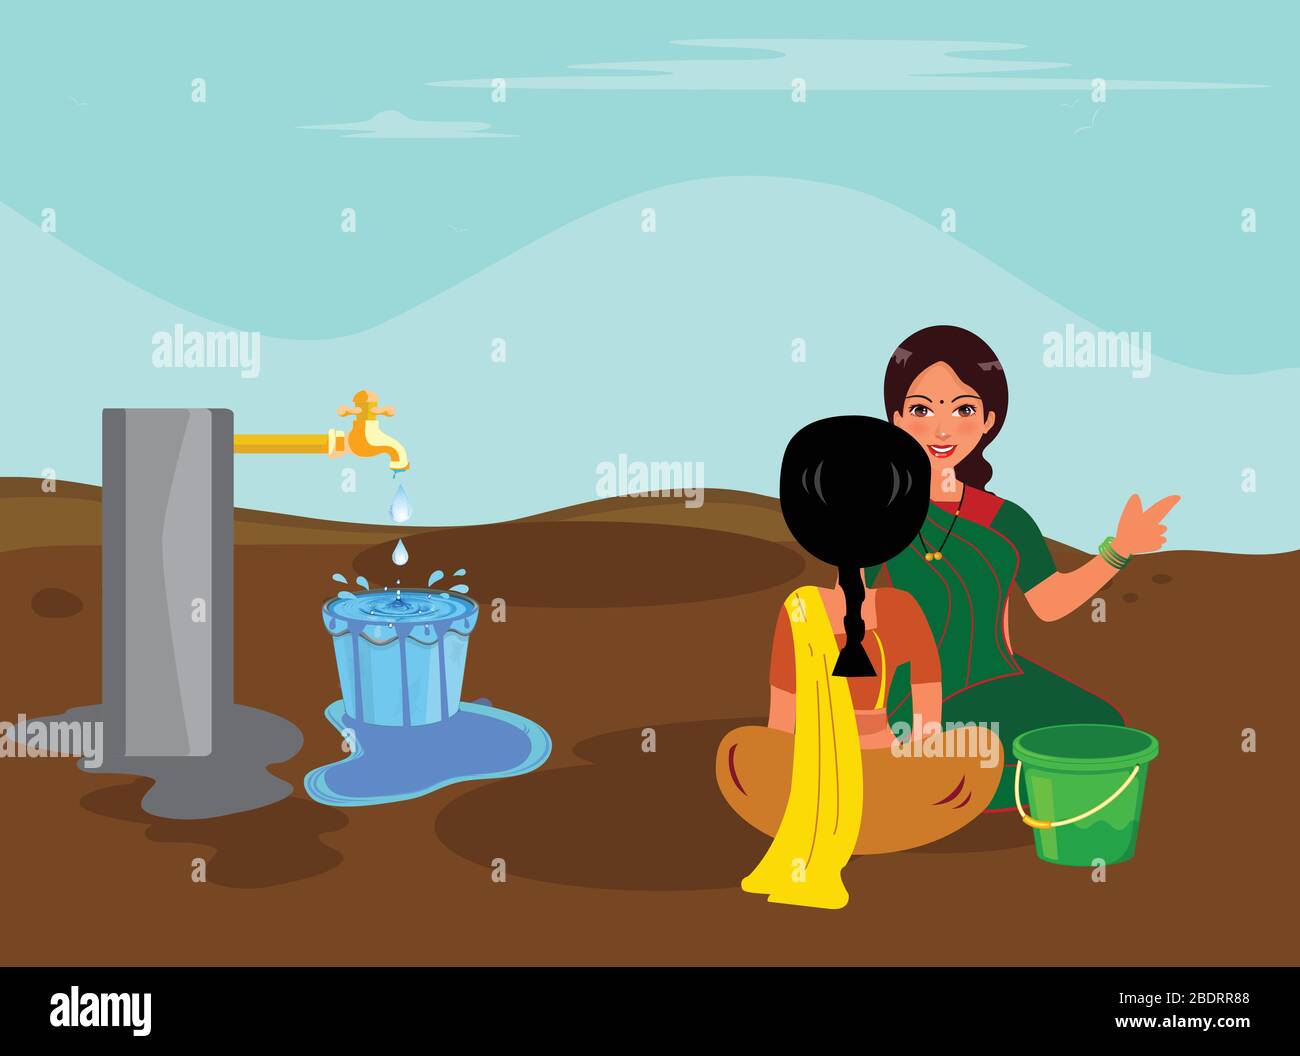 wastage of water in village for lack of awareness. wastage of water by human.water waste social concept for saving water in earth.Two women discussed Stock Vector